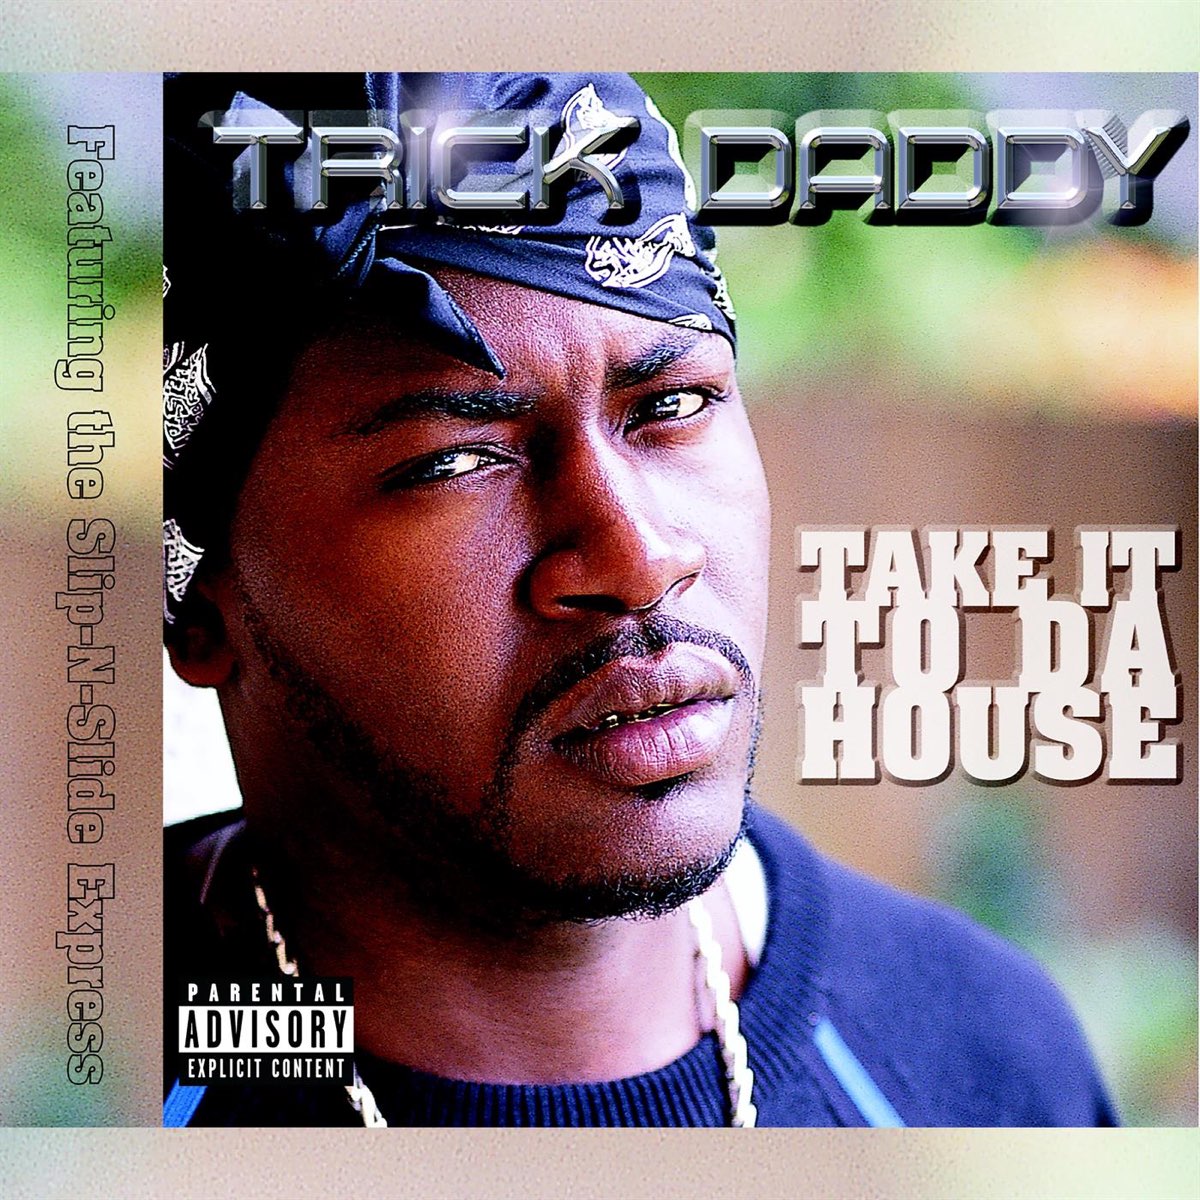 Trick Daddy. Cribs Trick Daddy. Straight up Trick Daddy. Xikers House of tricky album.